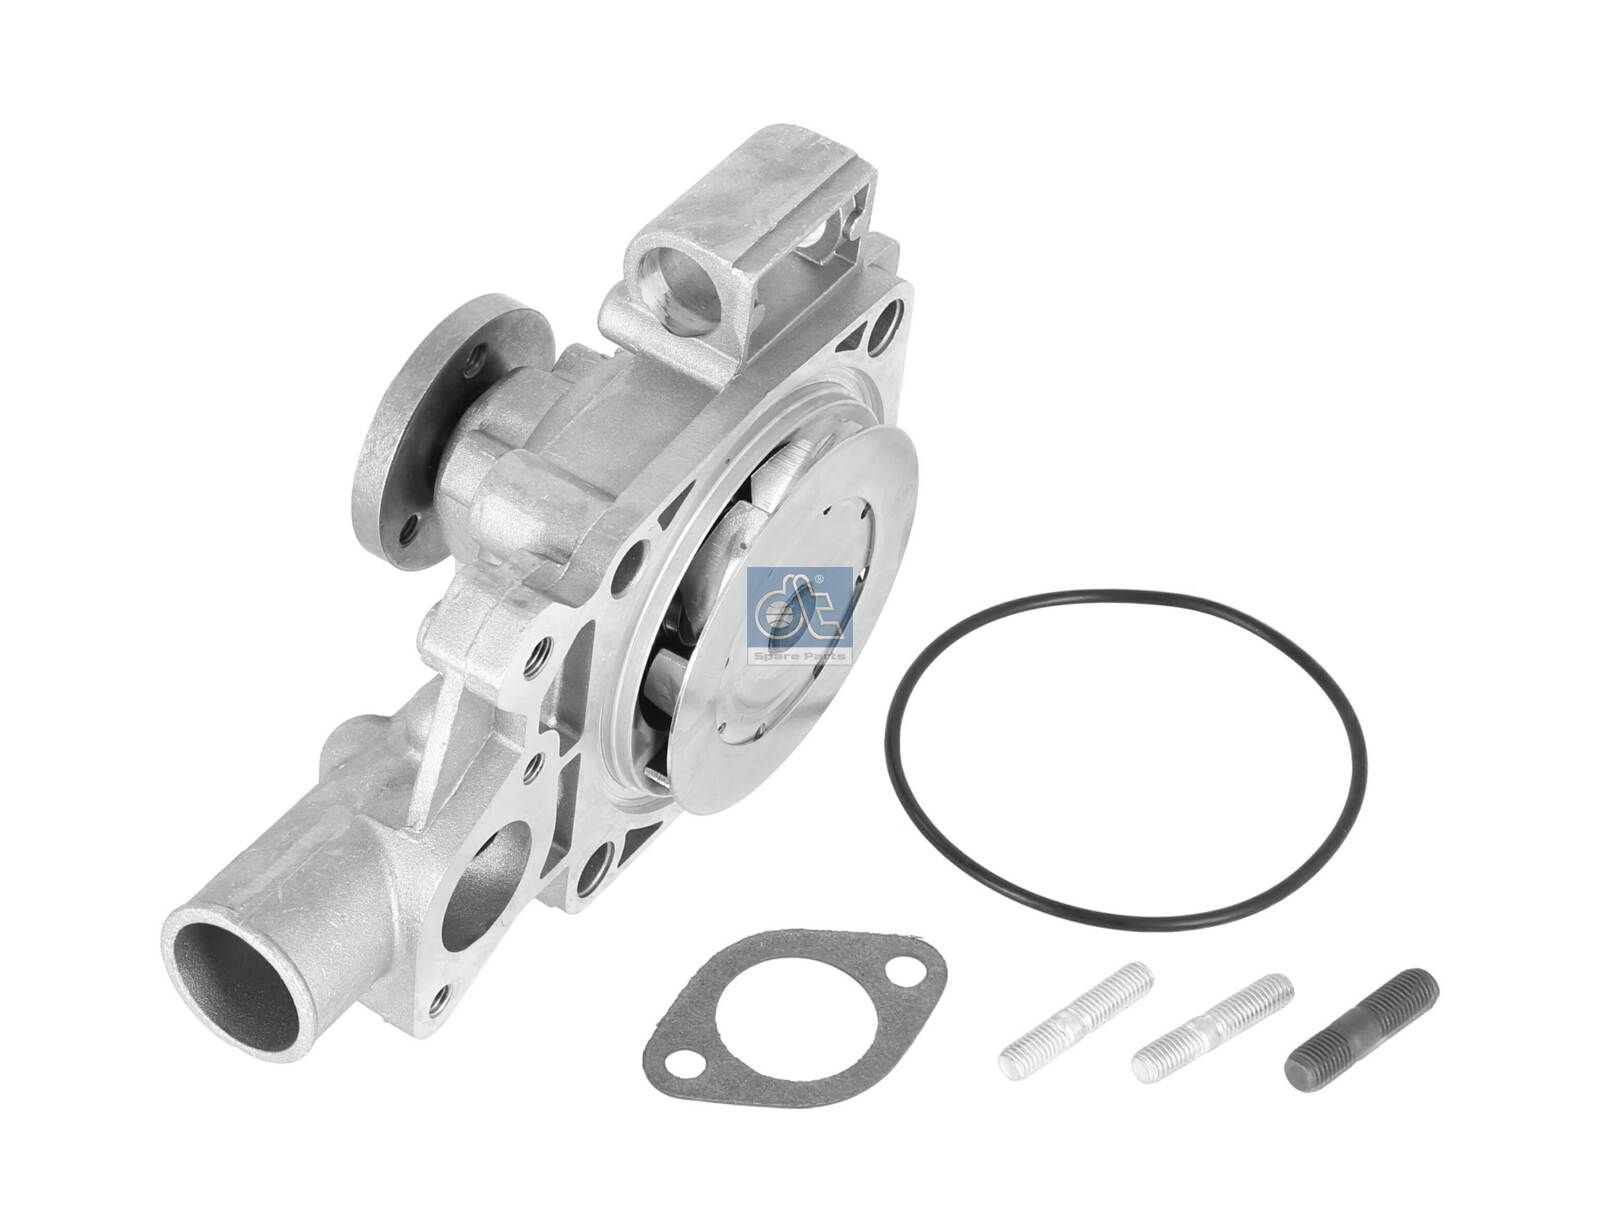 Opel CORSA Water pump 10129643 DT Spare Parts 7.60038 online buy